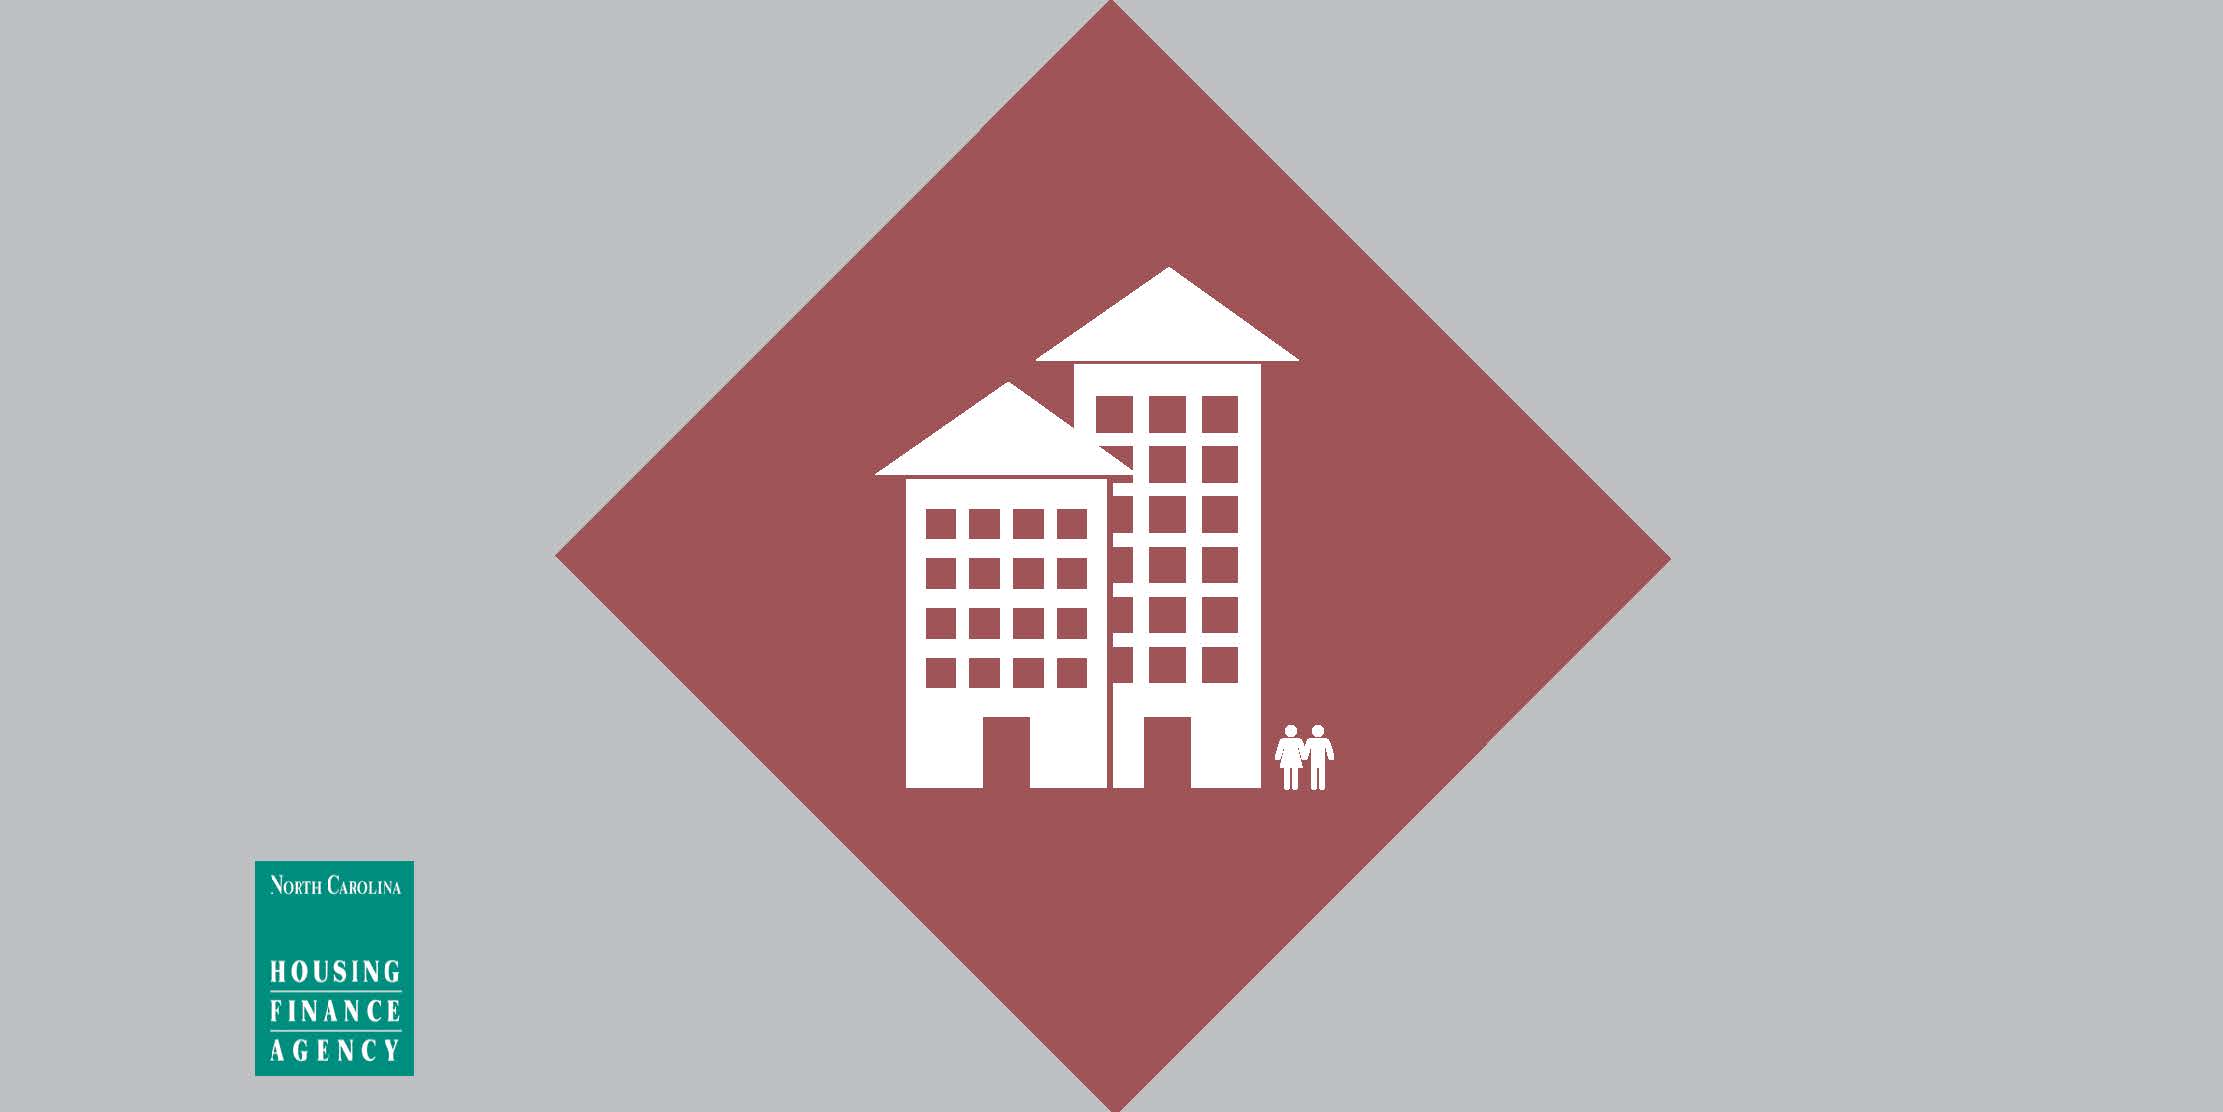 Red diamond with apartments in center in a gray graphic